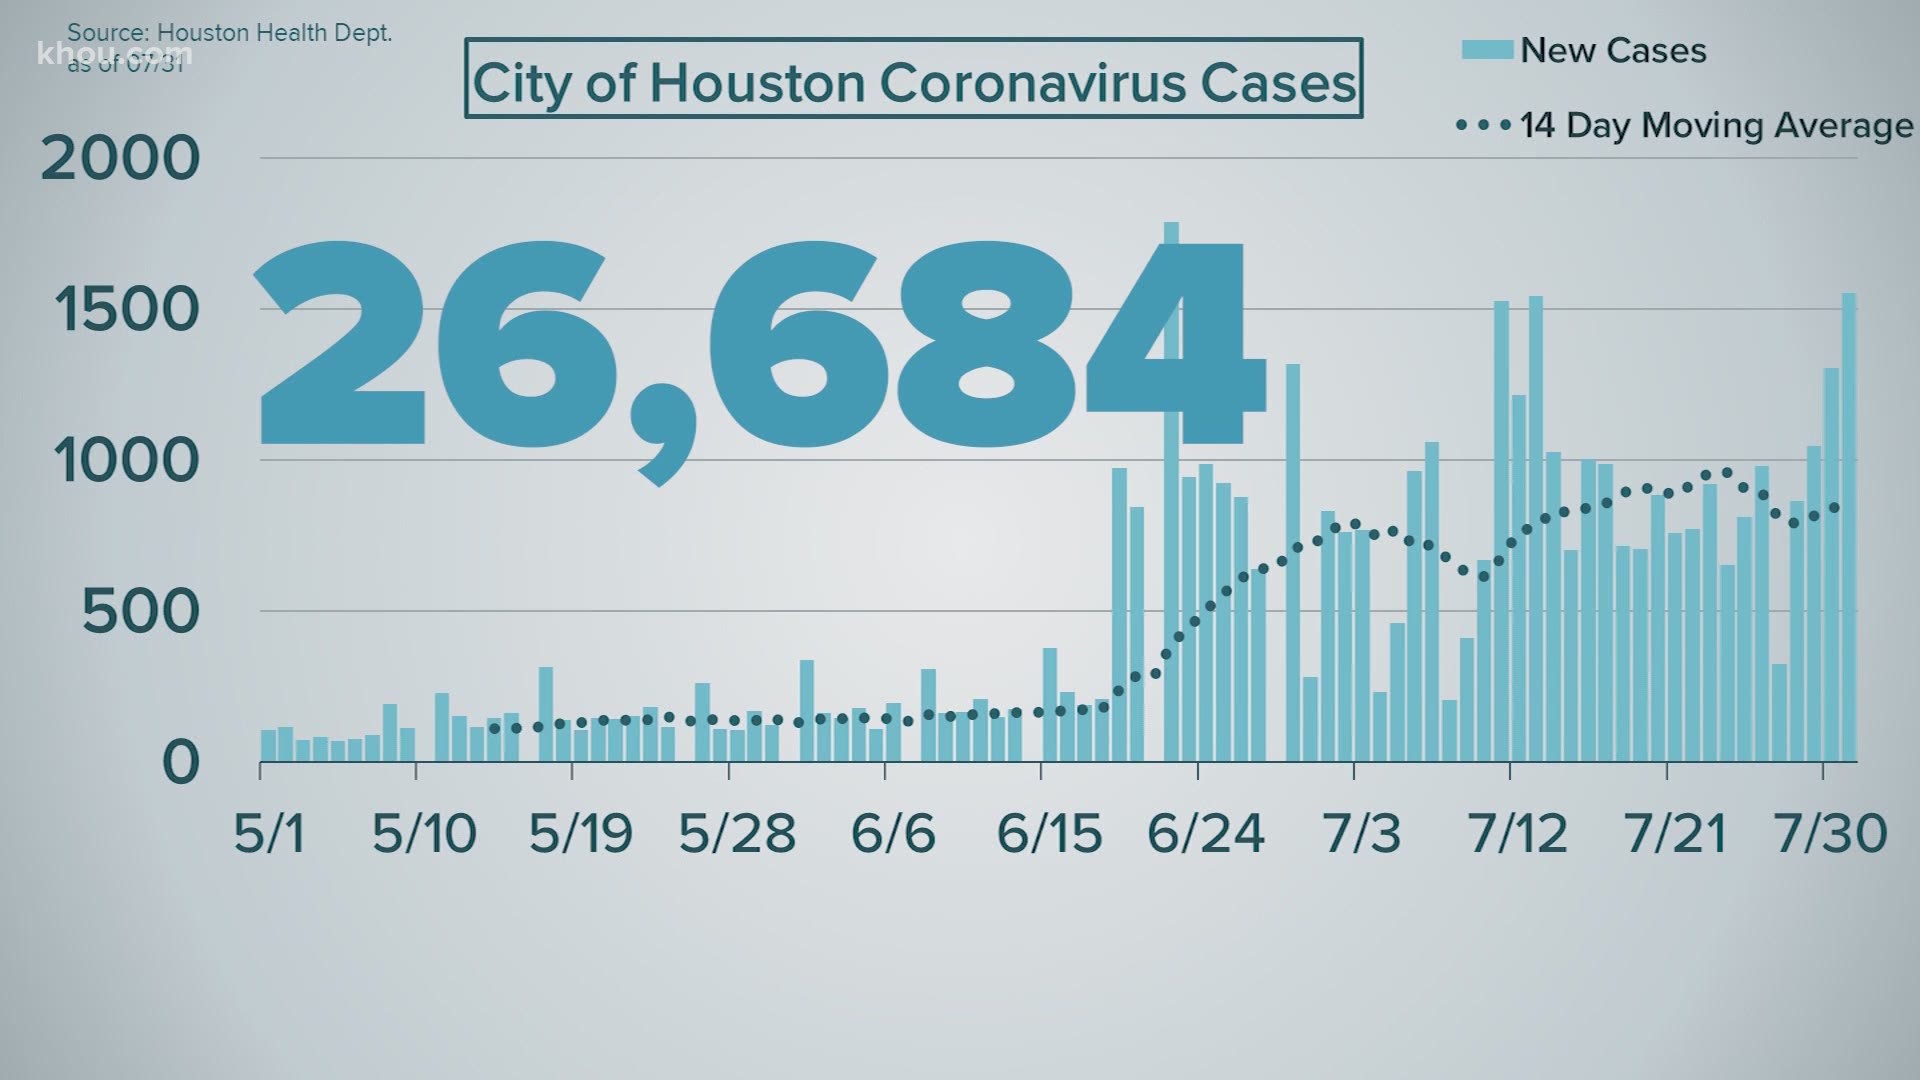 In July, the state reported coronavirus 3,315 deaths and 252,884 cases. Both totals in July were more than all other months of the pandemic combined.